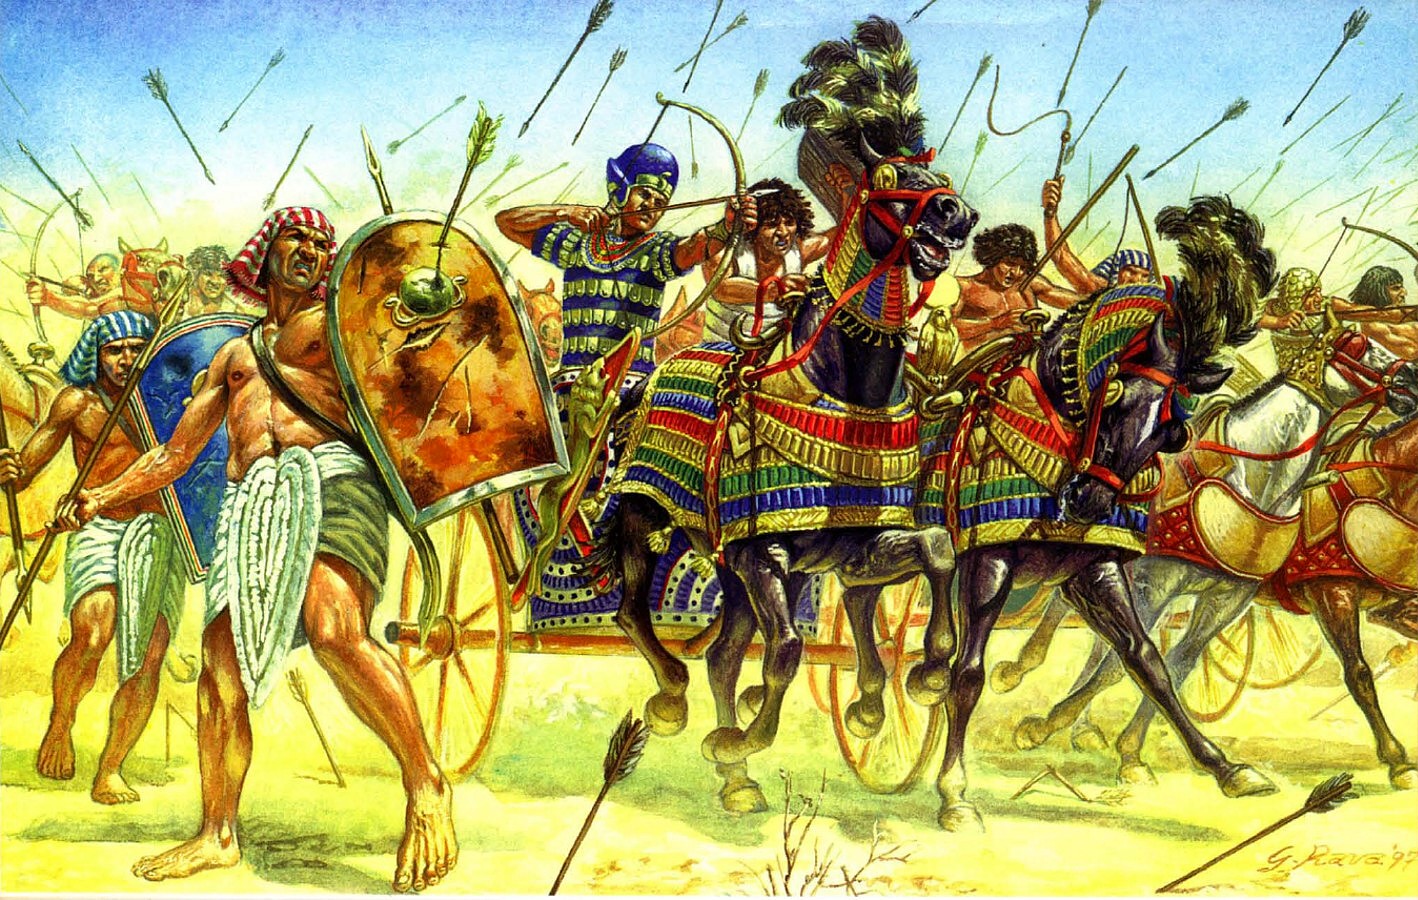 and-finally-giuseppe-ravas-rendition-of-the-battle-of-kadesh-scanned-from-a-vae-victis-magazine.jpg